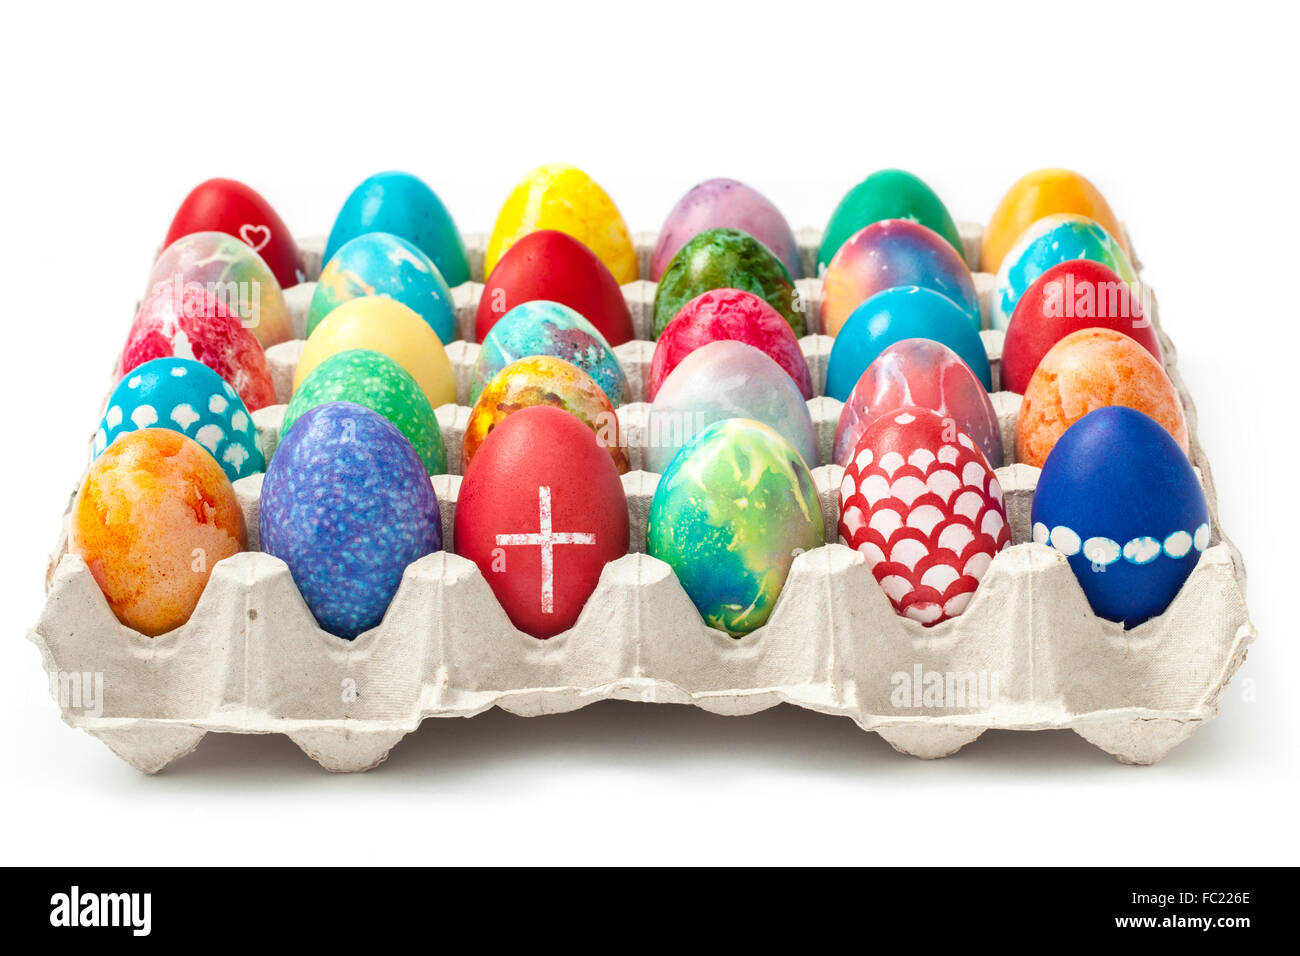 Full tray with colored and ornate Easter eggs isolated on white background. Stock Photo